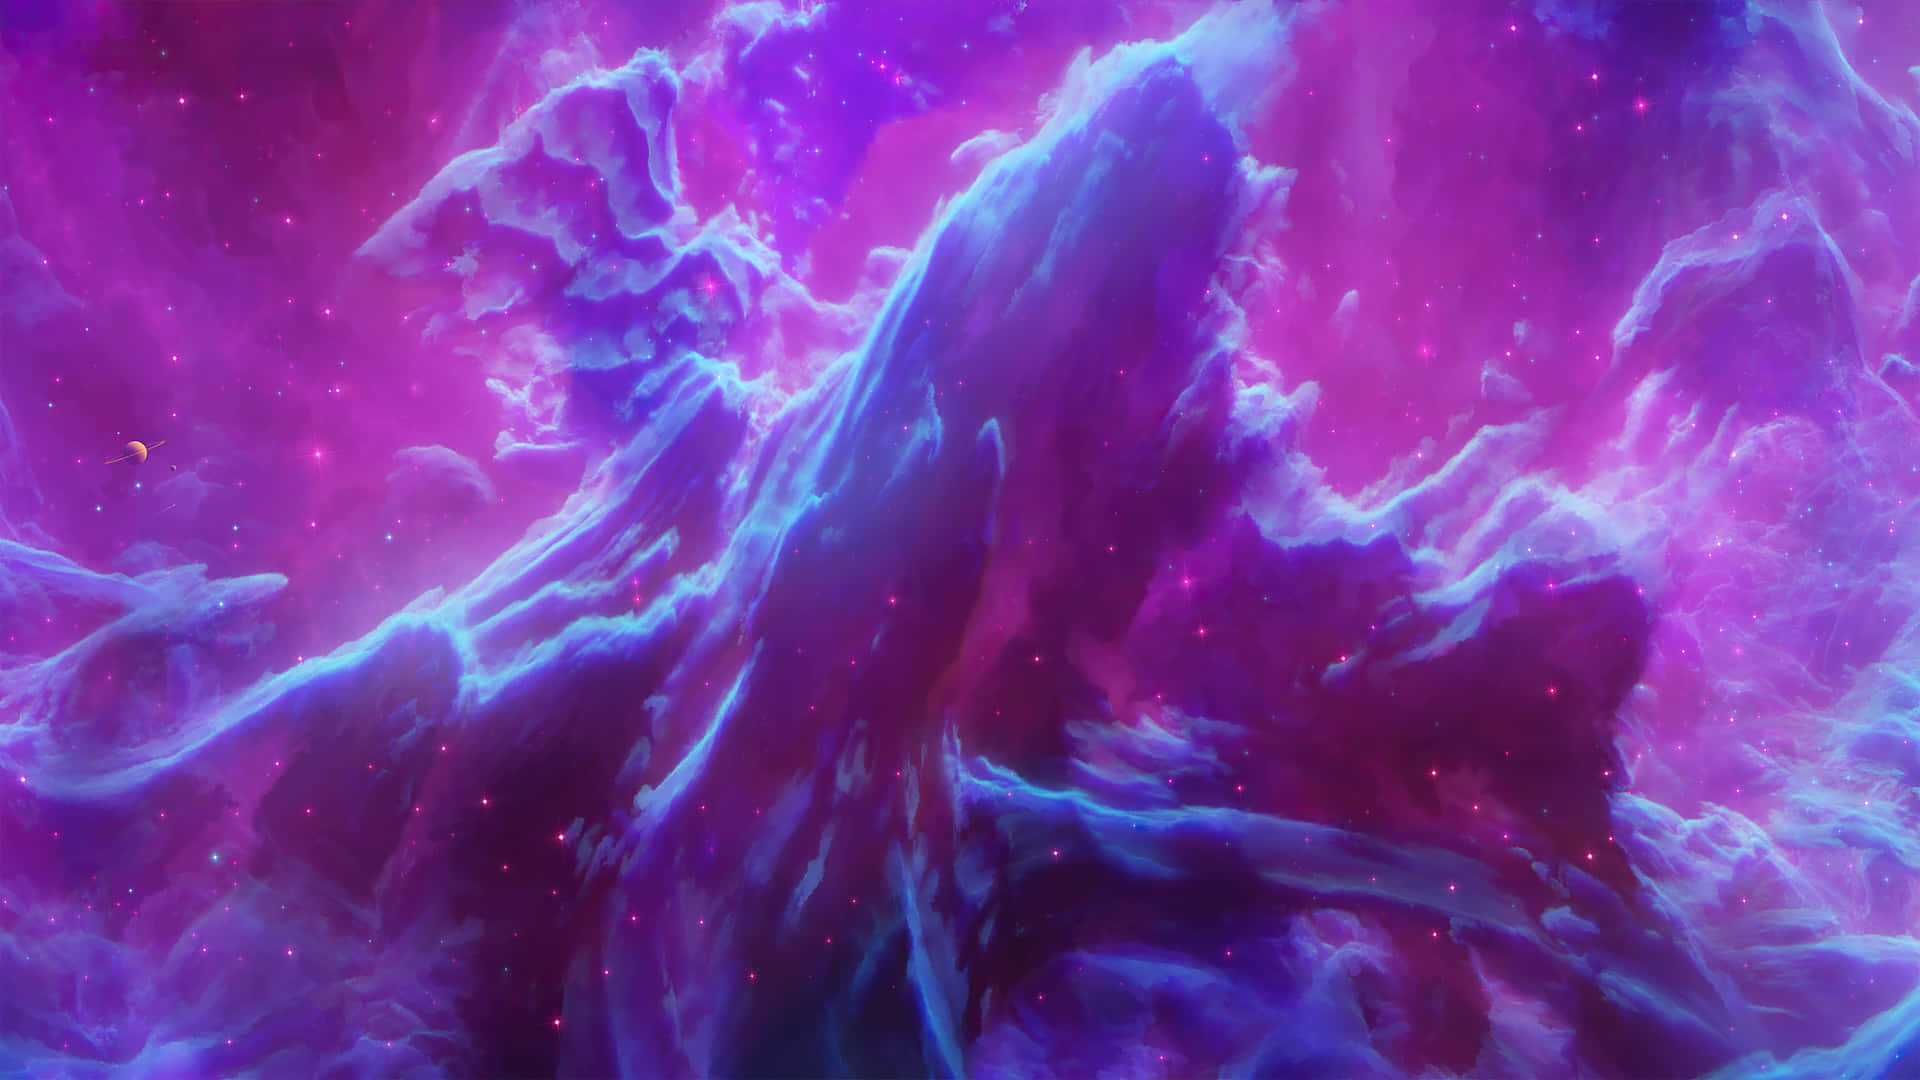 Get lost in the magical stars and colors of this 'Galaxy Themed Painting' Wallpaper